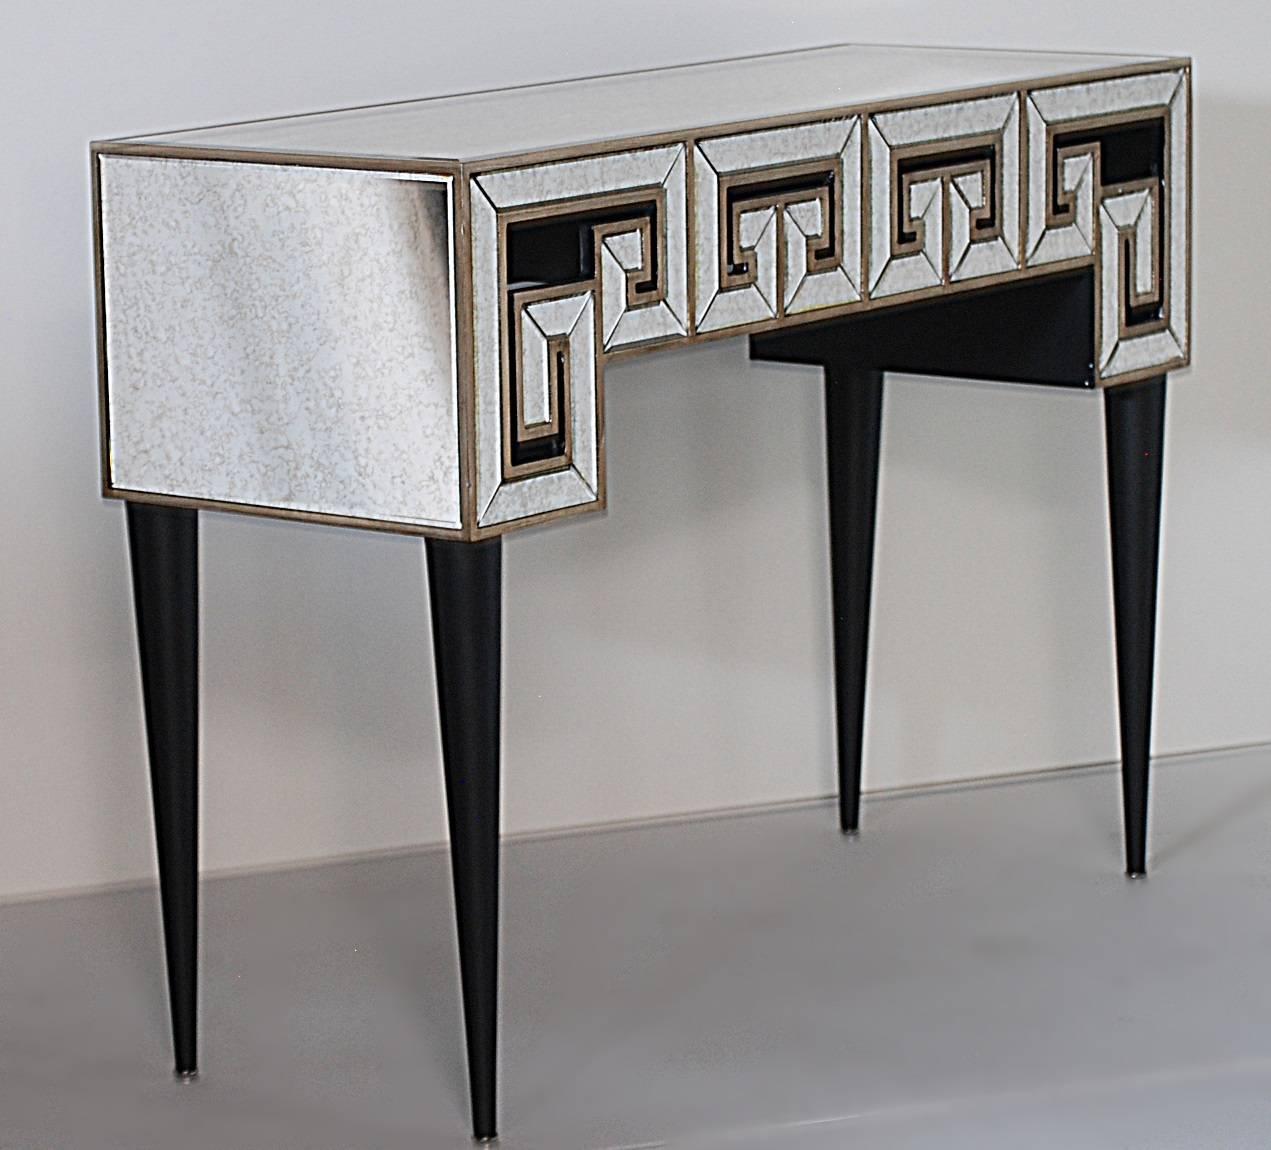 Asian Modern Greek key console table with an antiqued mirror finish.